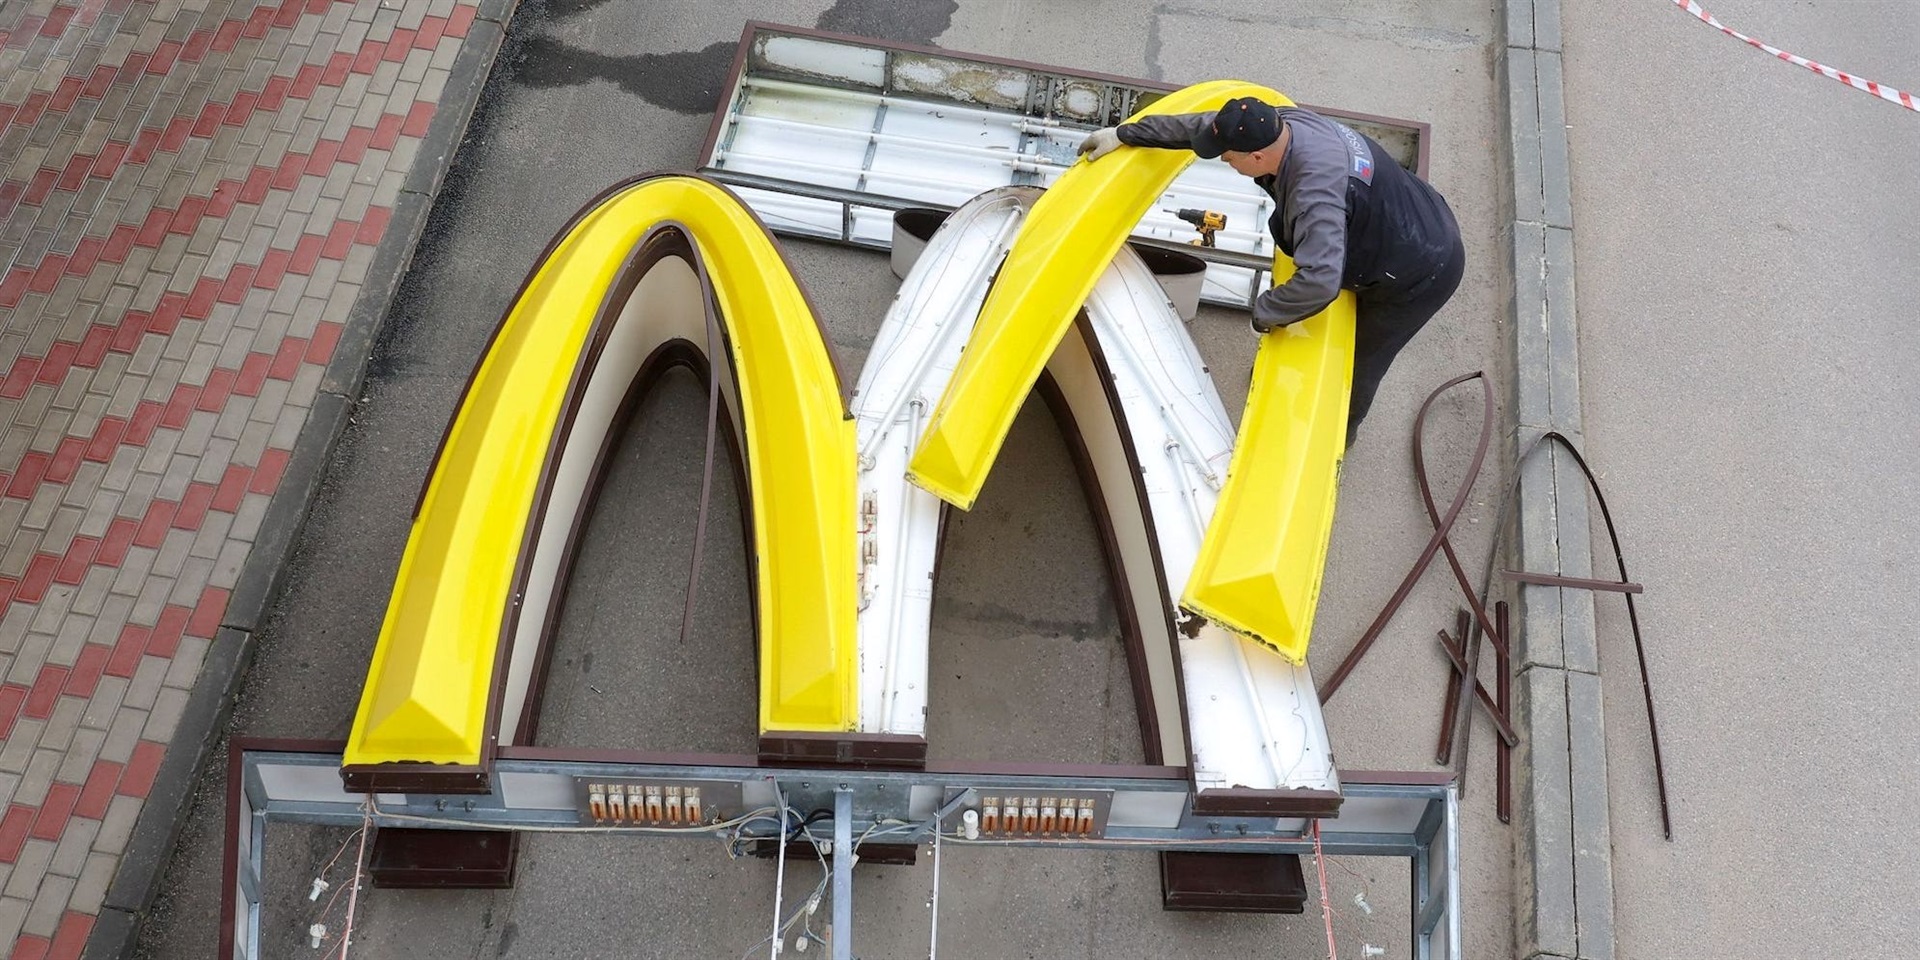 A worker dismantles the McDonald's Golden Arches logo at a drive-through restaurant in Kingisepp, Russia. REUTERS/Anton Vaganov